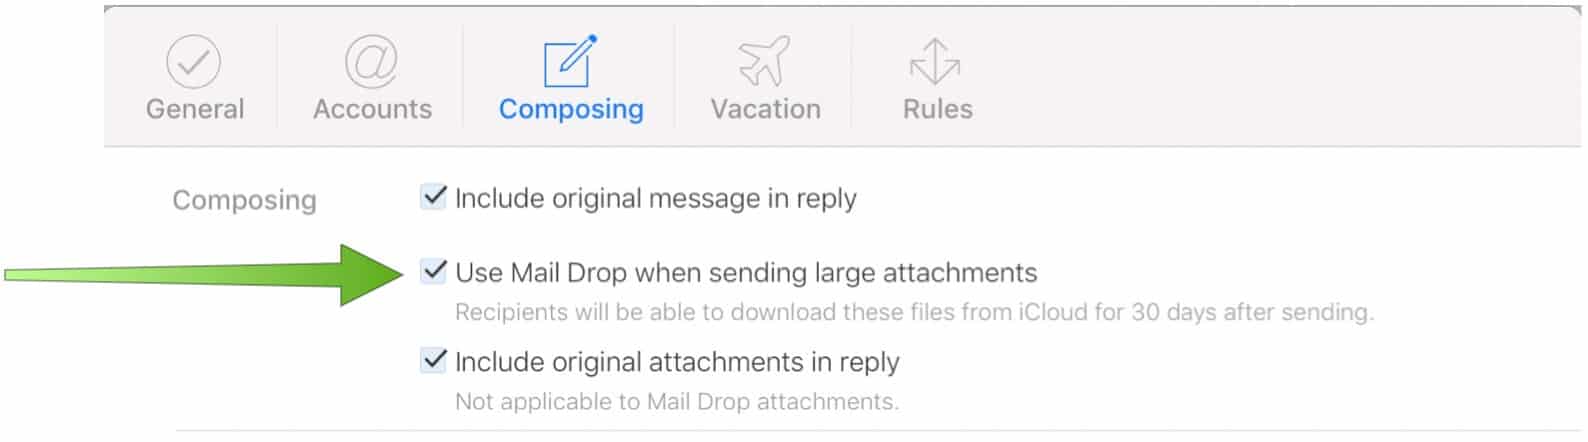 How to Send Files Via Mail Drop on iPhone Using iCloud - 47